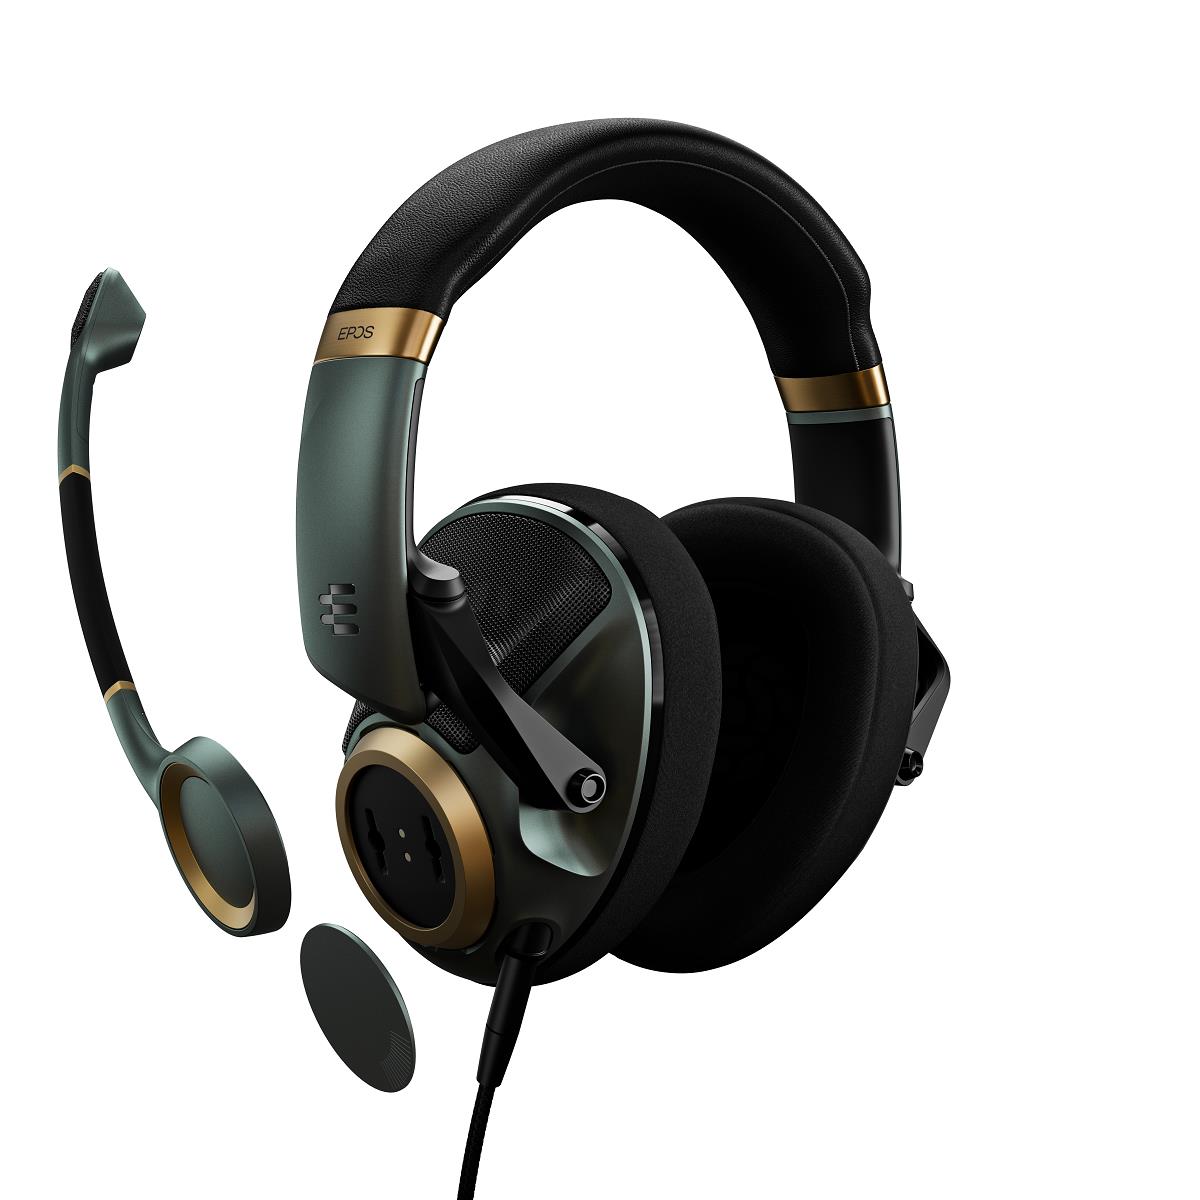 EPOS Audio H6PRO Open Acoustic Gaming Headset (Racing Green) - image 4 of 8